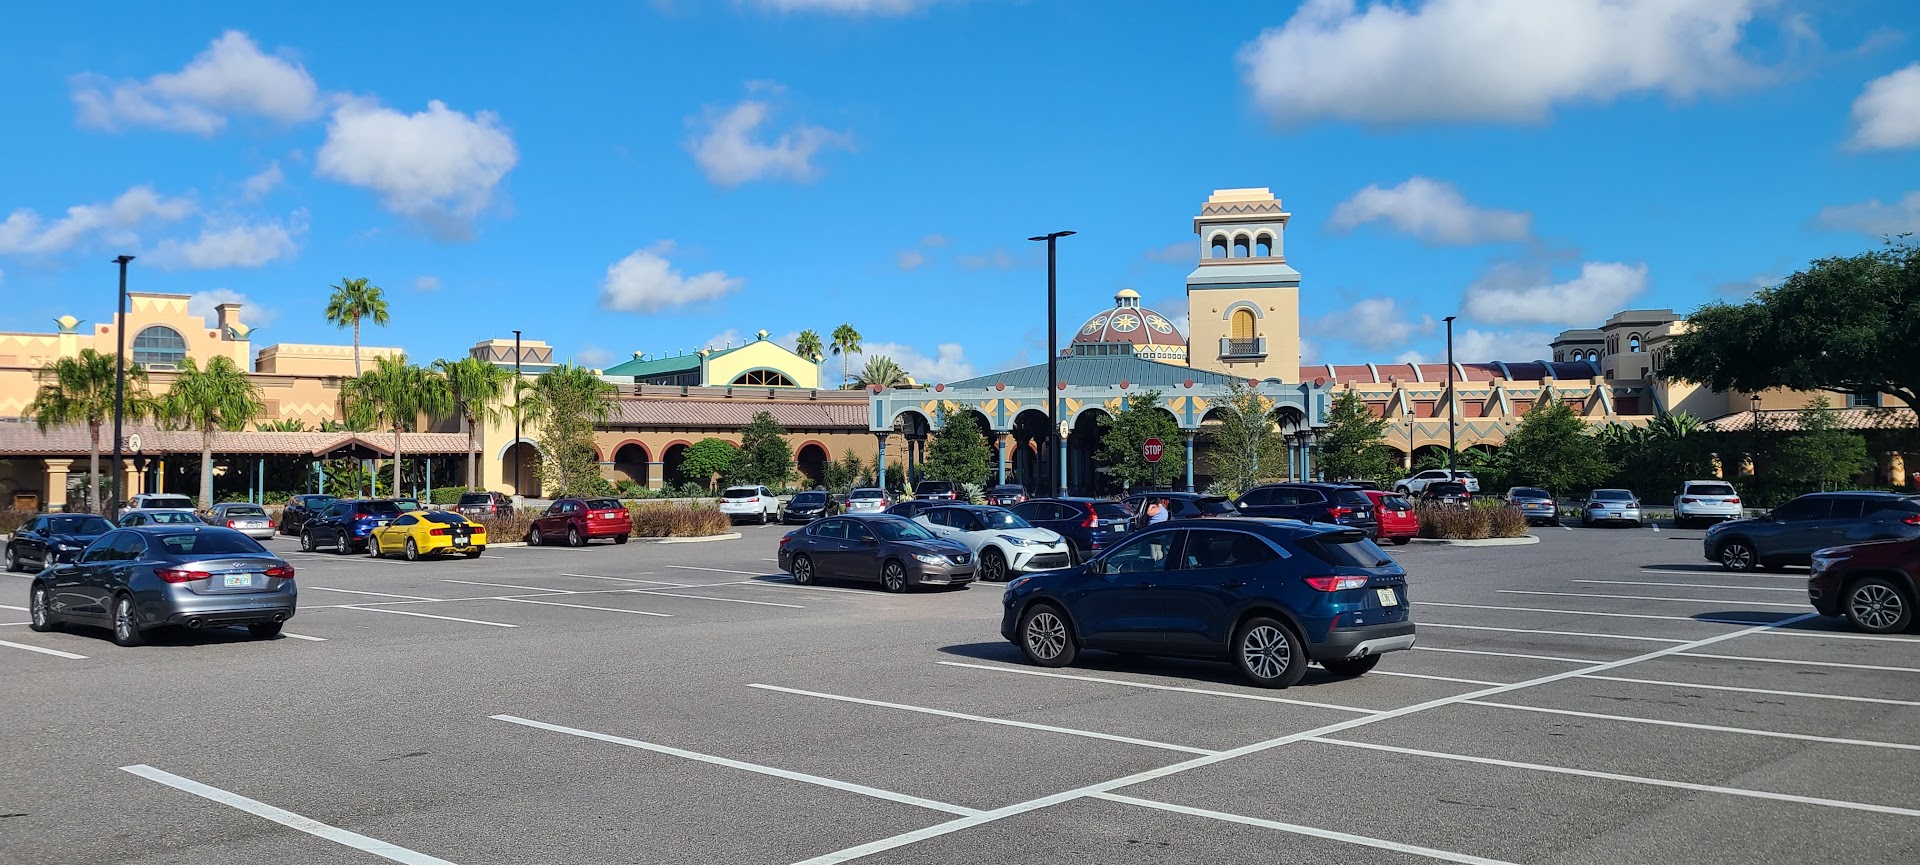 Can I Park At A Disney Resort Without Staying There? Disney World Resorts 4